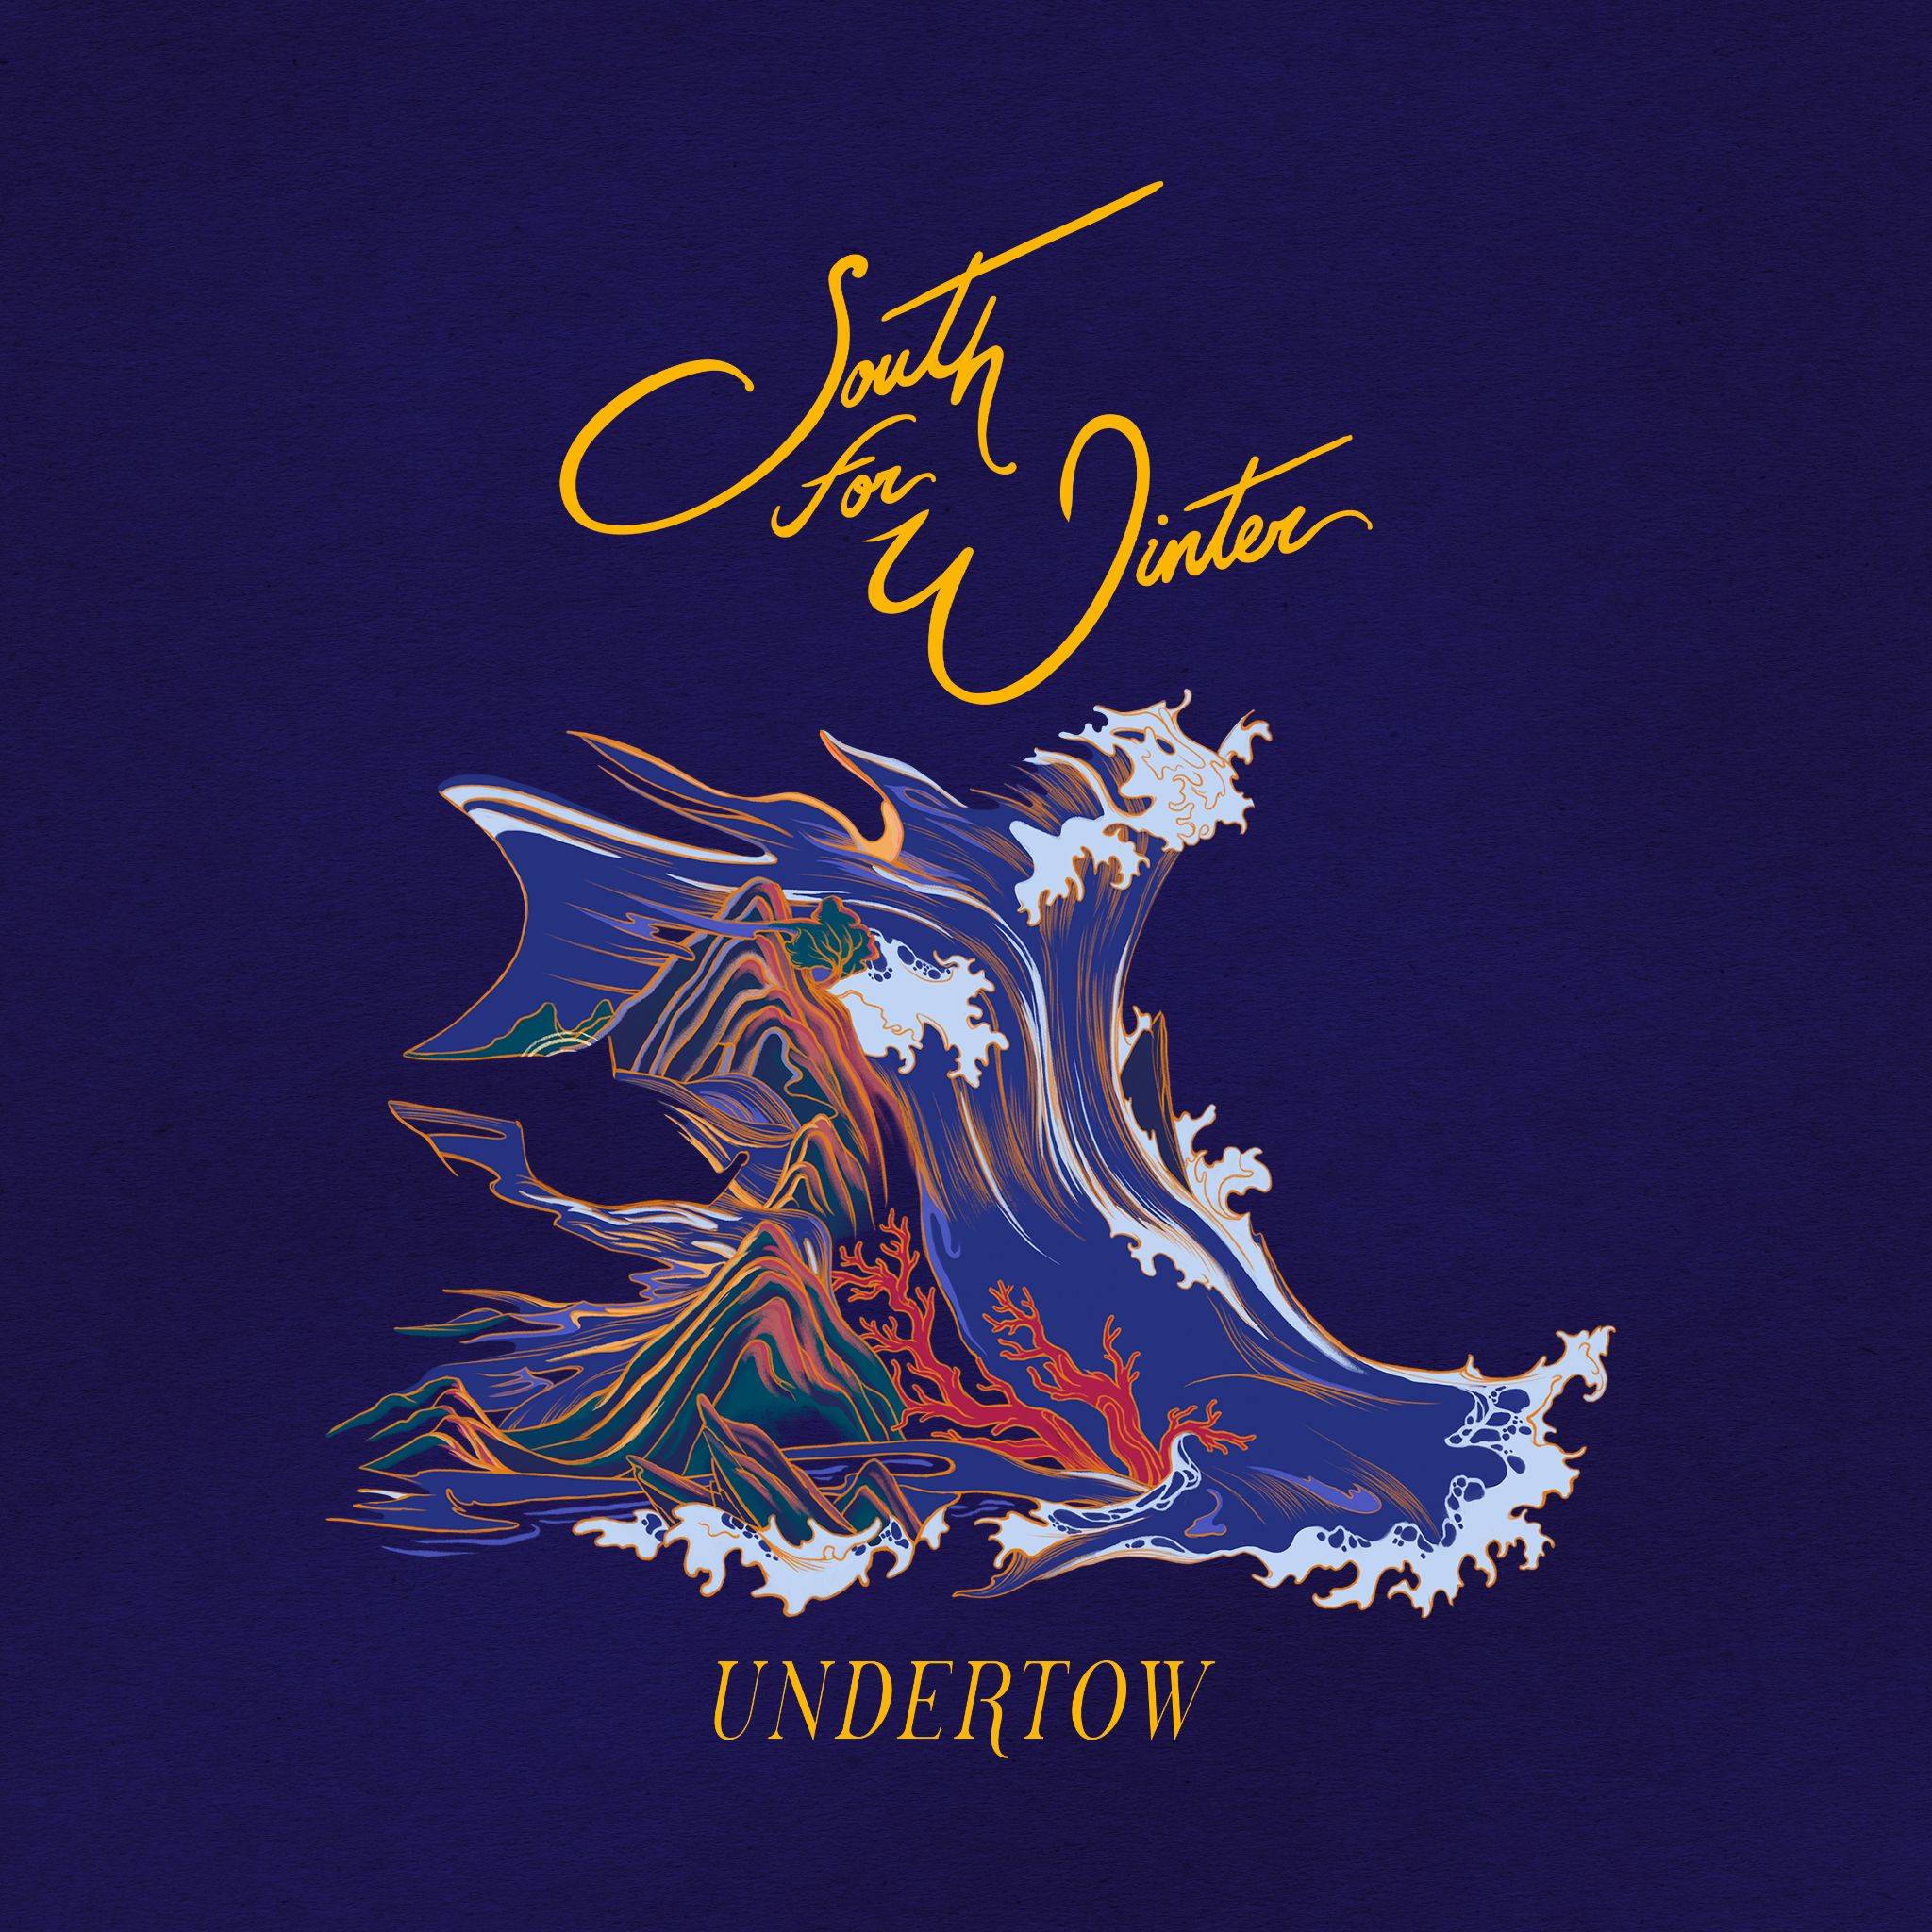 South For Winter Feat. Tom West Releases First Single, “Undertow” from the Second Half of their Sophomore Album, Of Sea and Sky